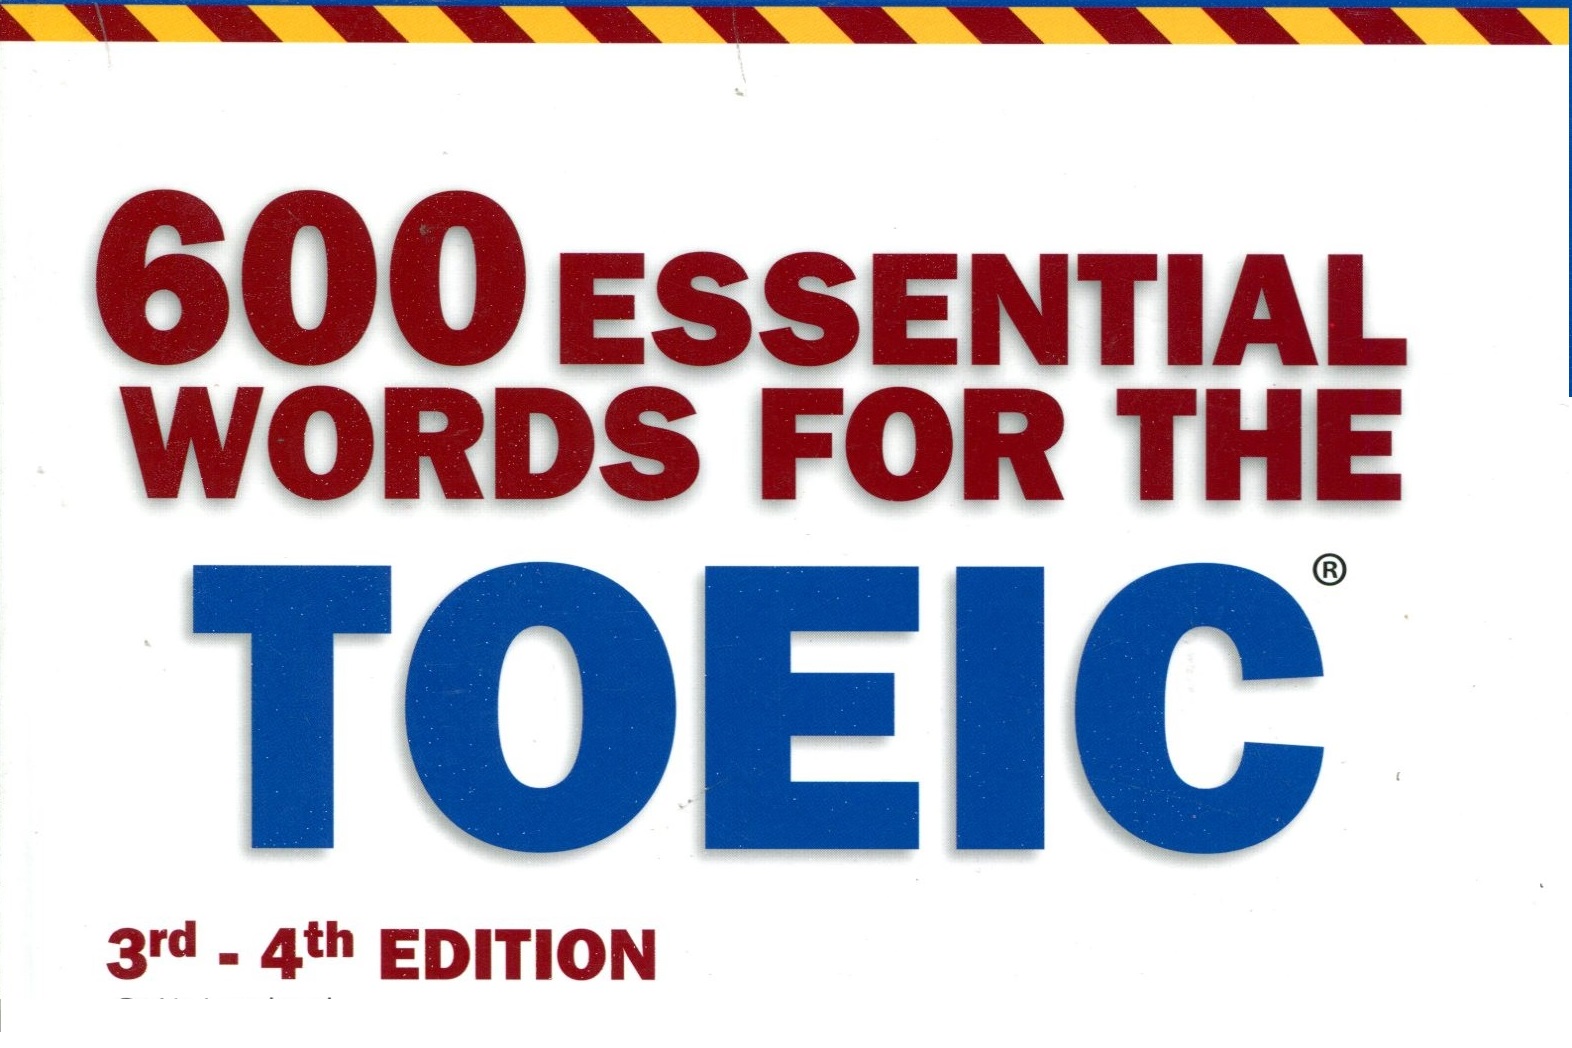 600 essential words for the toeic 4th edition pdf download hp deskjet 2655 software download